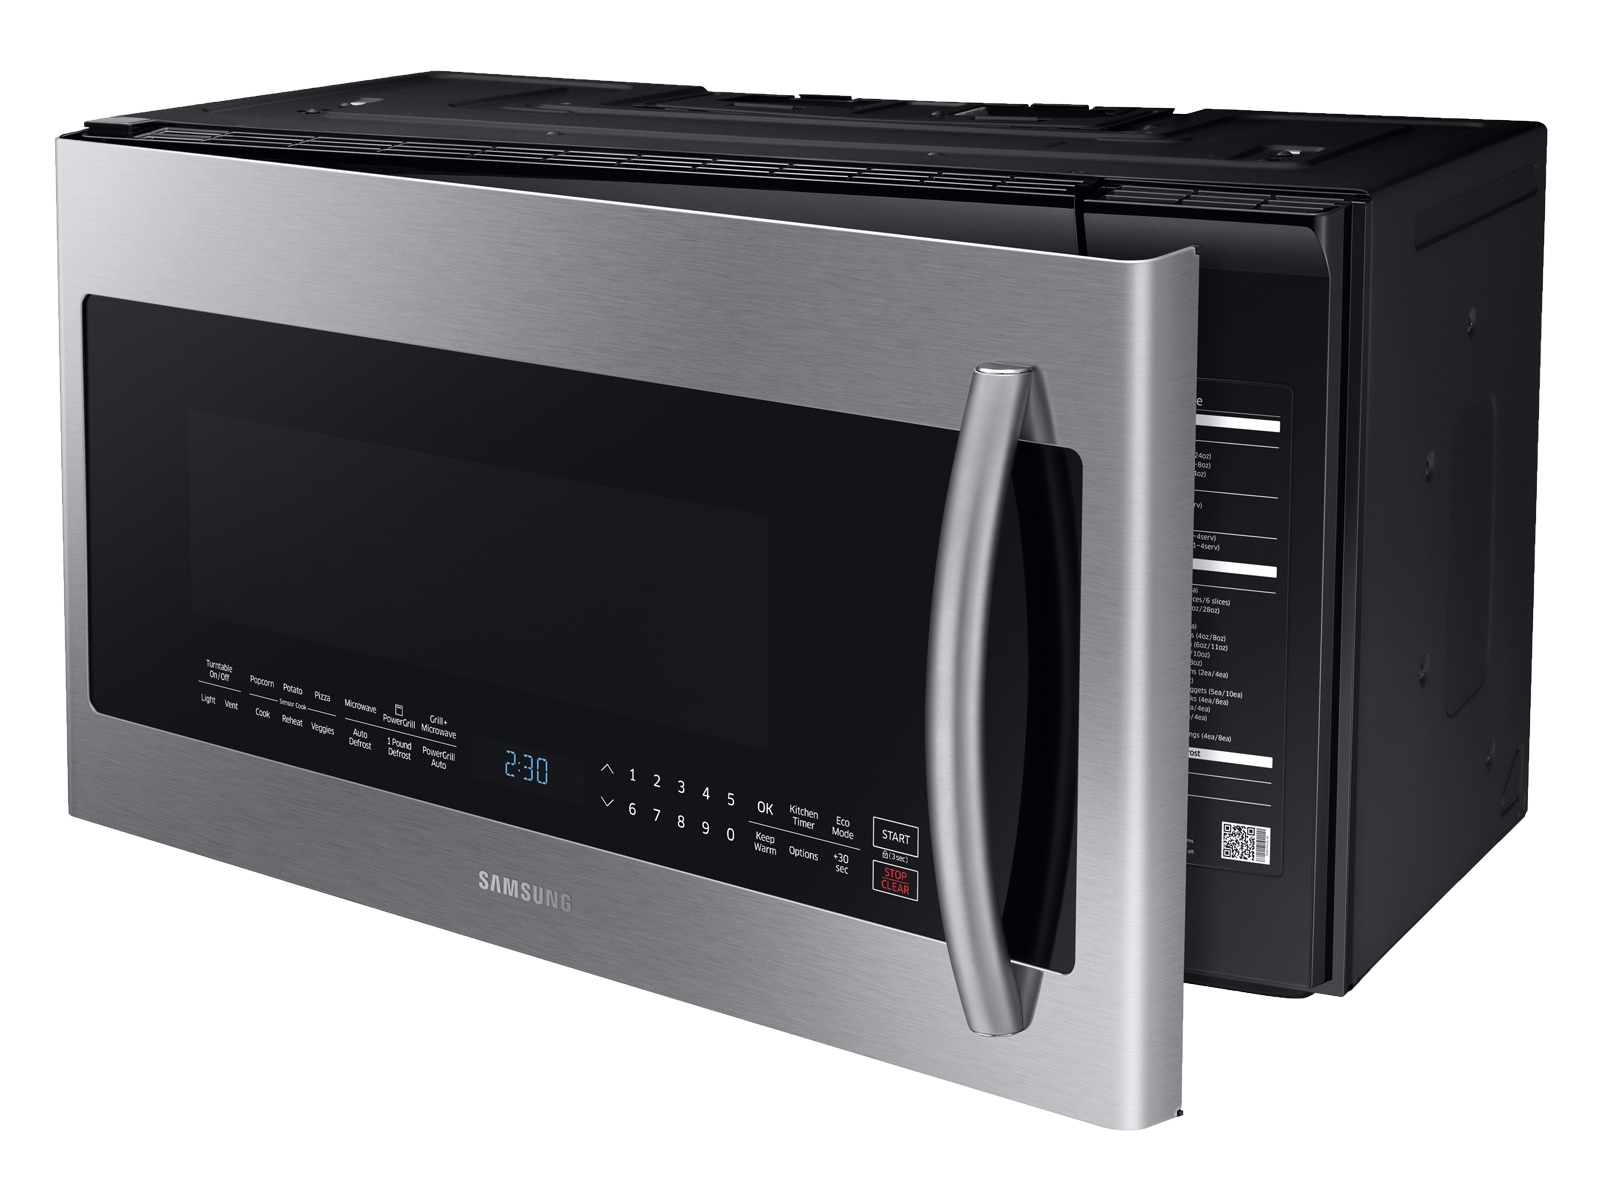 https://image-us.samsung.com/SamsungUS/home/home-appliances/microwaves/over-the-range/pdp/me21k7010ds/gallery/07_Microwave_OTR_ME21K7010DS_R-Perspective-Over_Silver.jpg?$product-details-jpg$